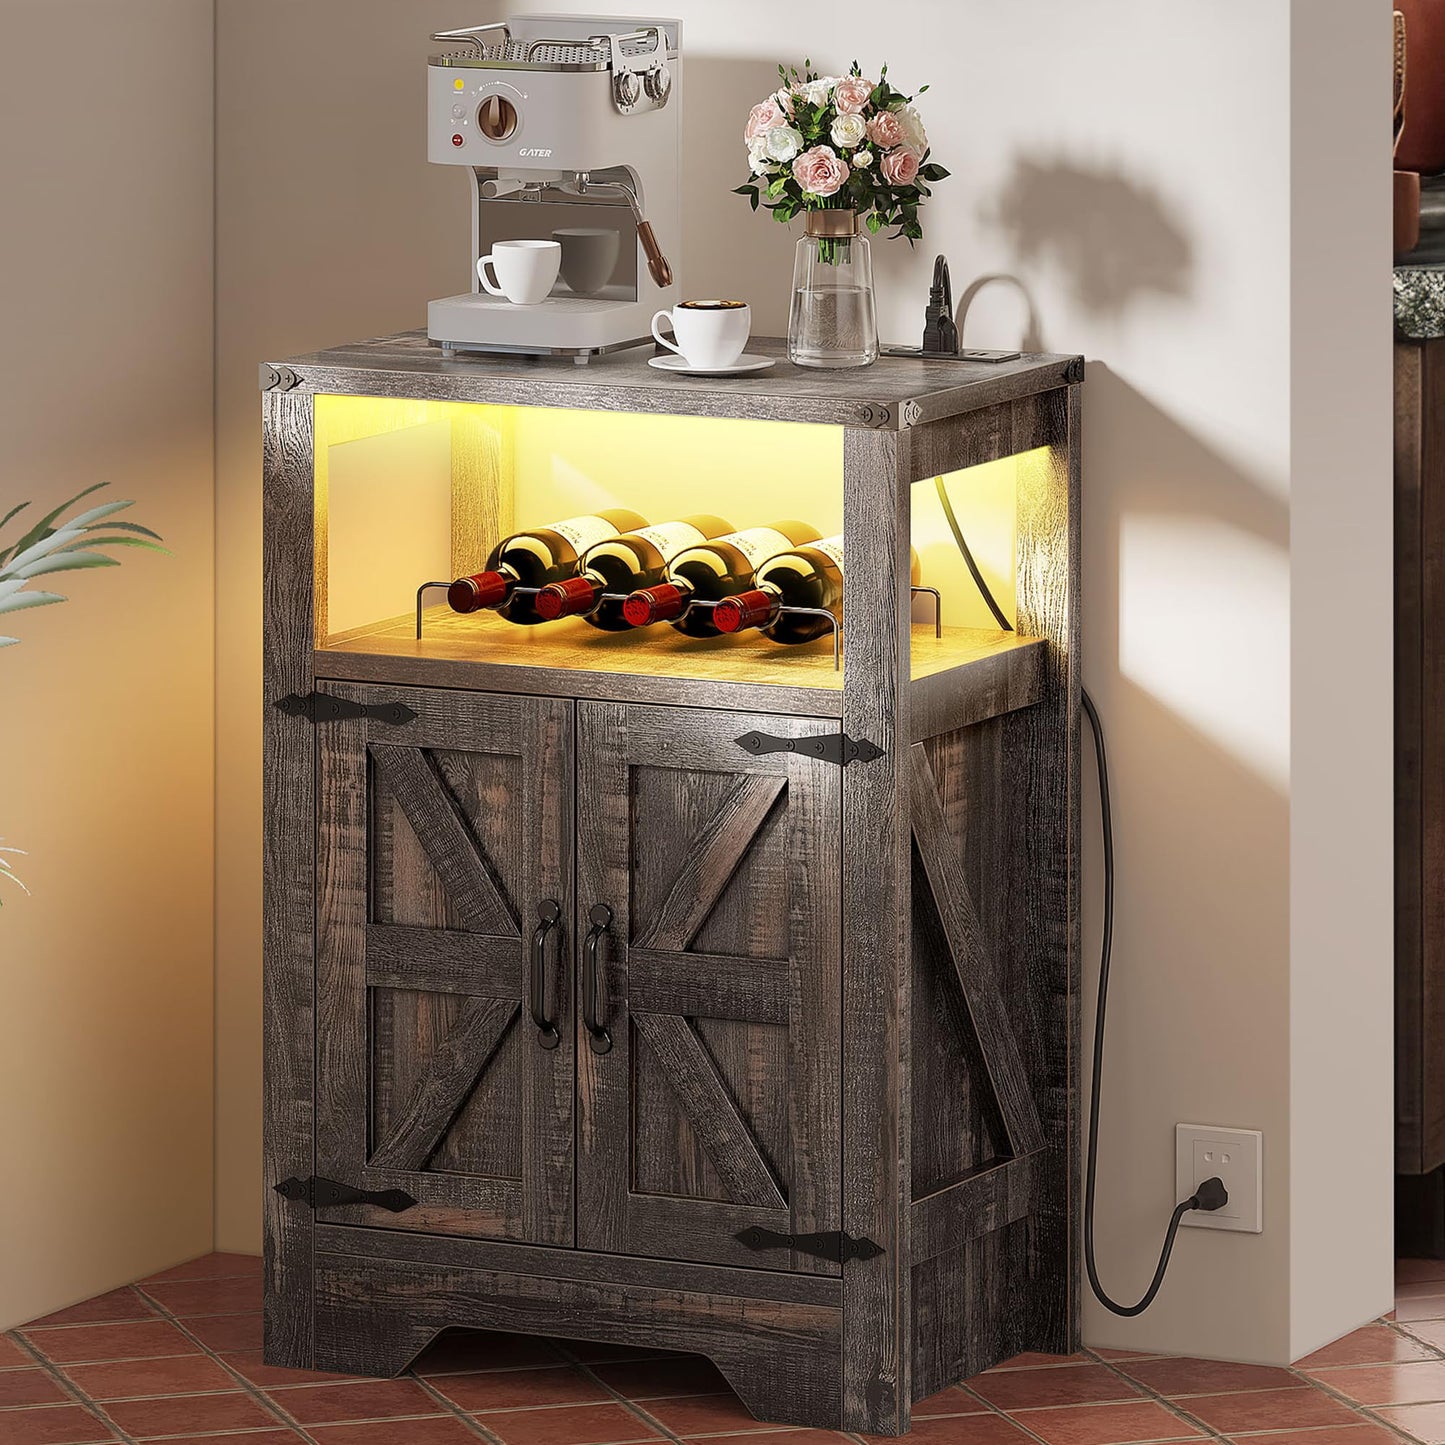 DWVO Wine Cabinet w/Power Outlets & LED Lights, 31.5" Farmhouse Bar Cabinet w/Wine Rack, Coffee Bar w/Glass Holder, Small Alcohol Cabinet w/Barn Door for Kitchen Dining Room, Dark Rustic Oak